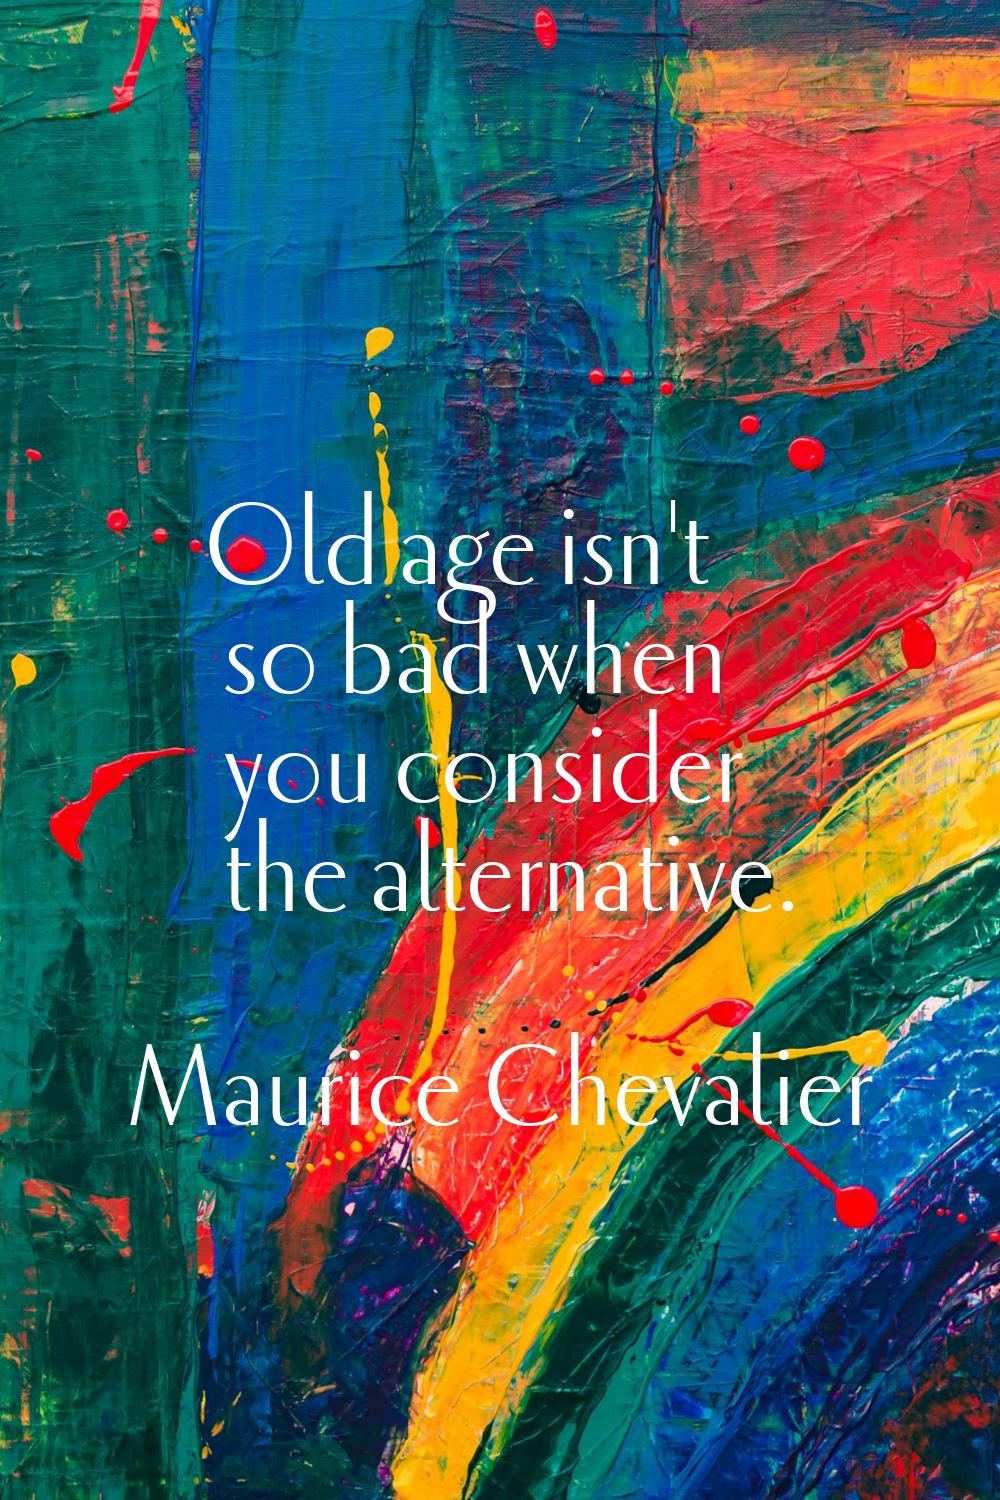 Old age isn't so bad when you consider the alternative.